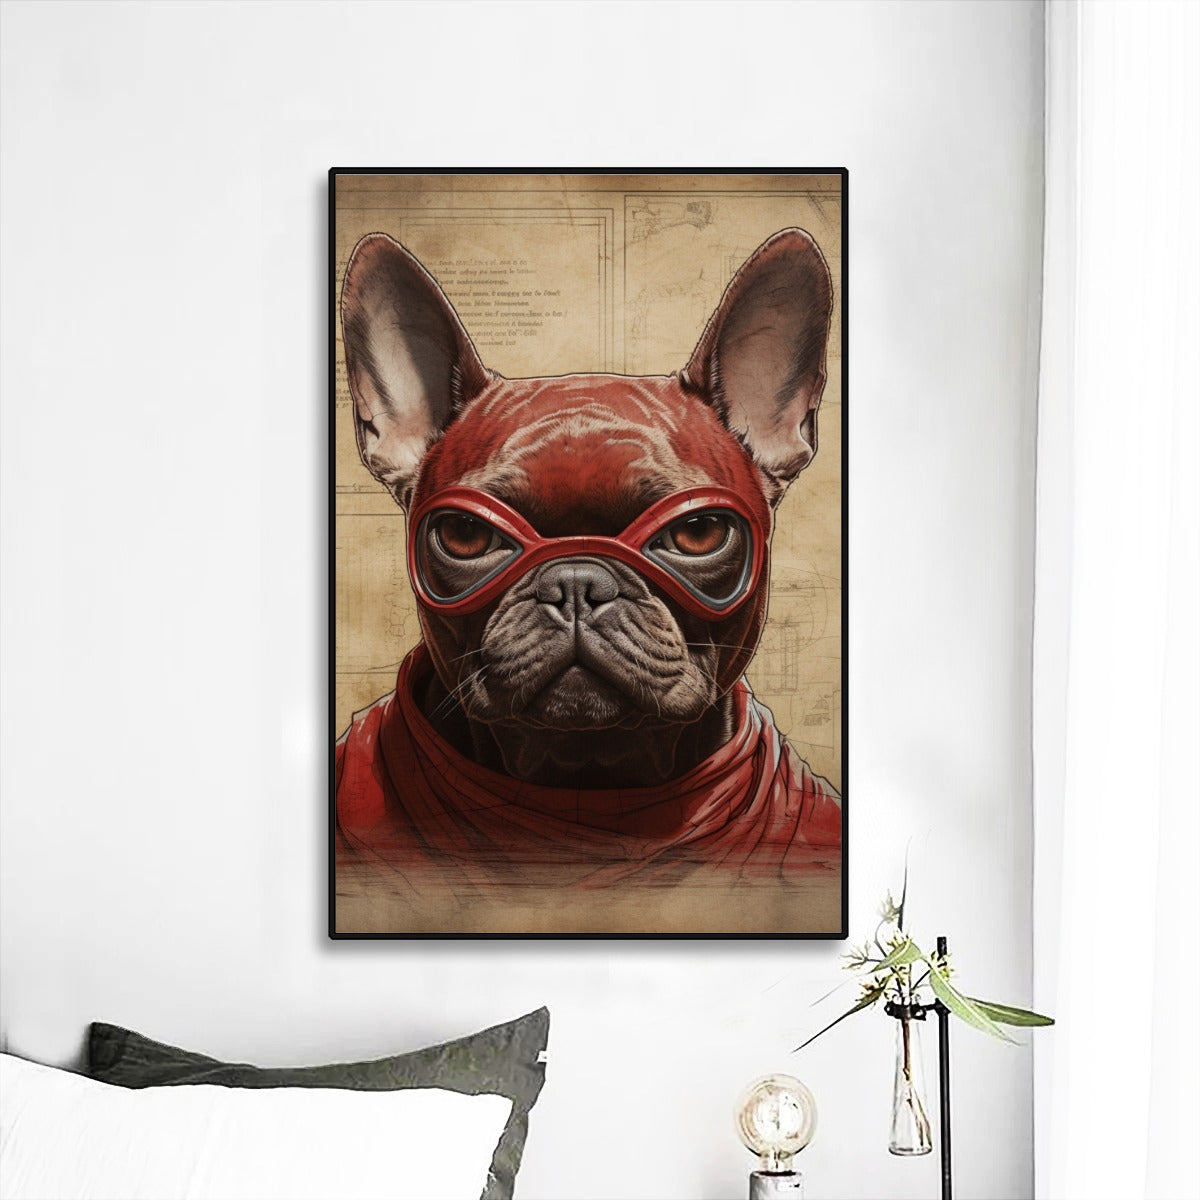 Enthralling Frenchie-Imagery Wall Mural